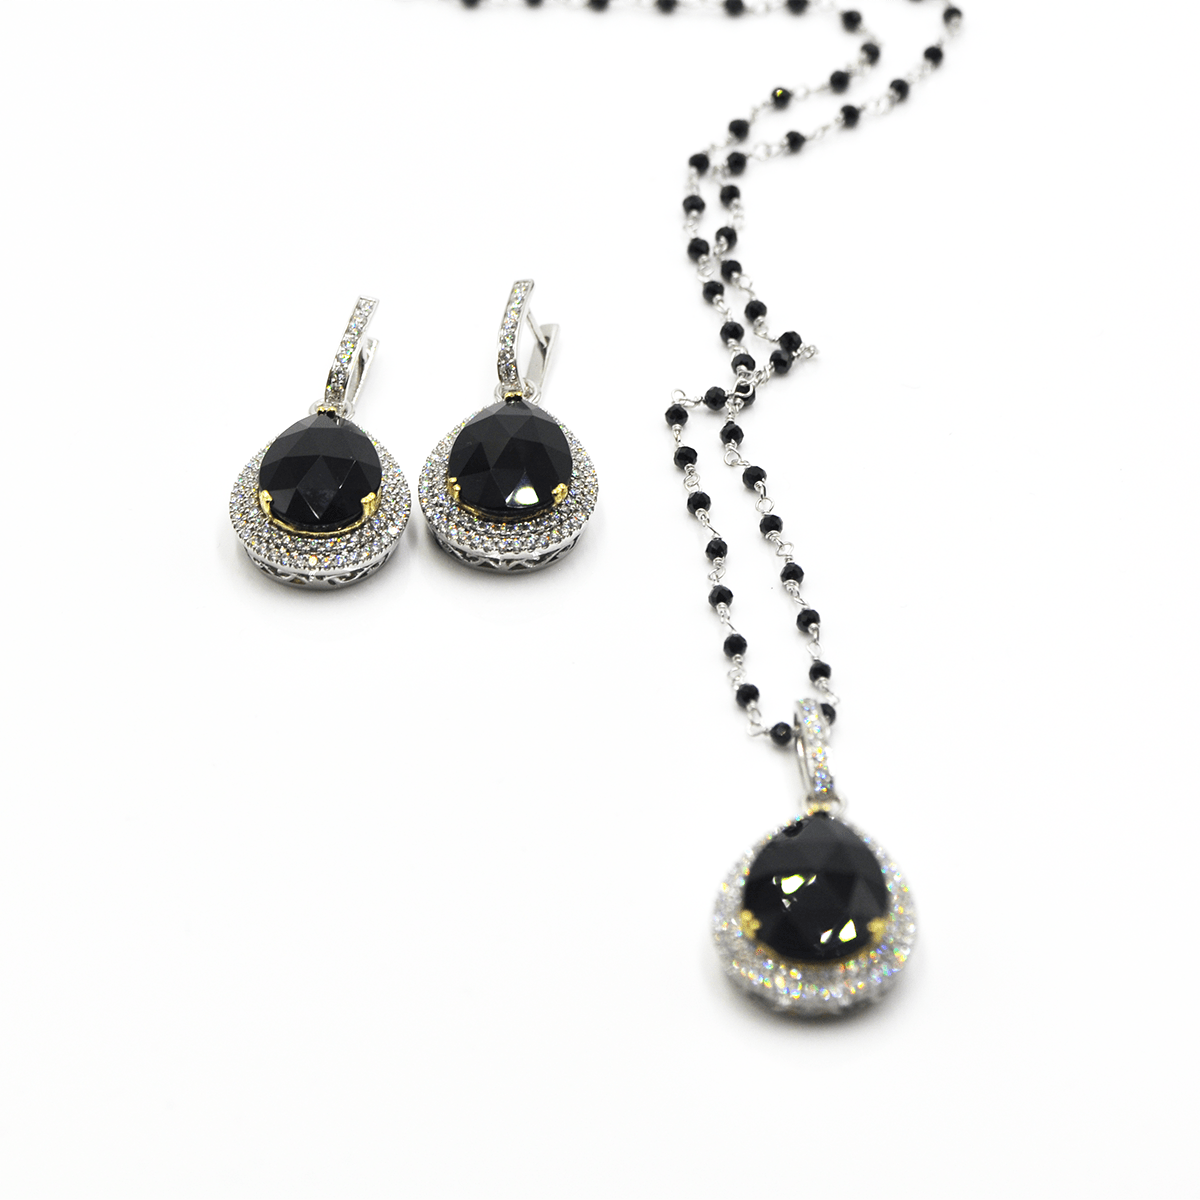 Women’s Earring and Necklace Set - Anointed Beauty - 18 Karat White Gold Necklace With Diamonds And Onyx Set